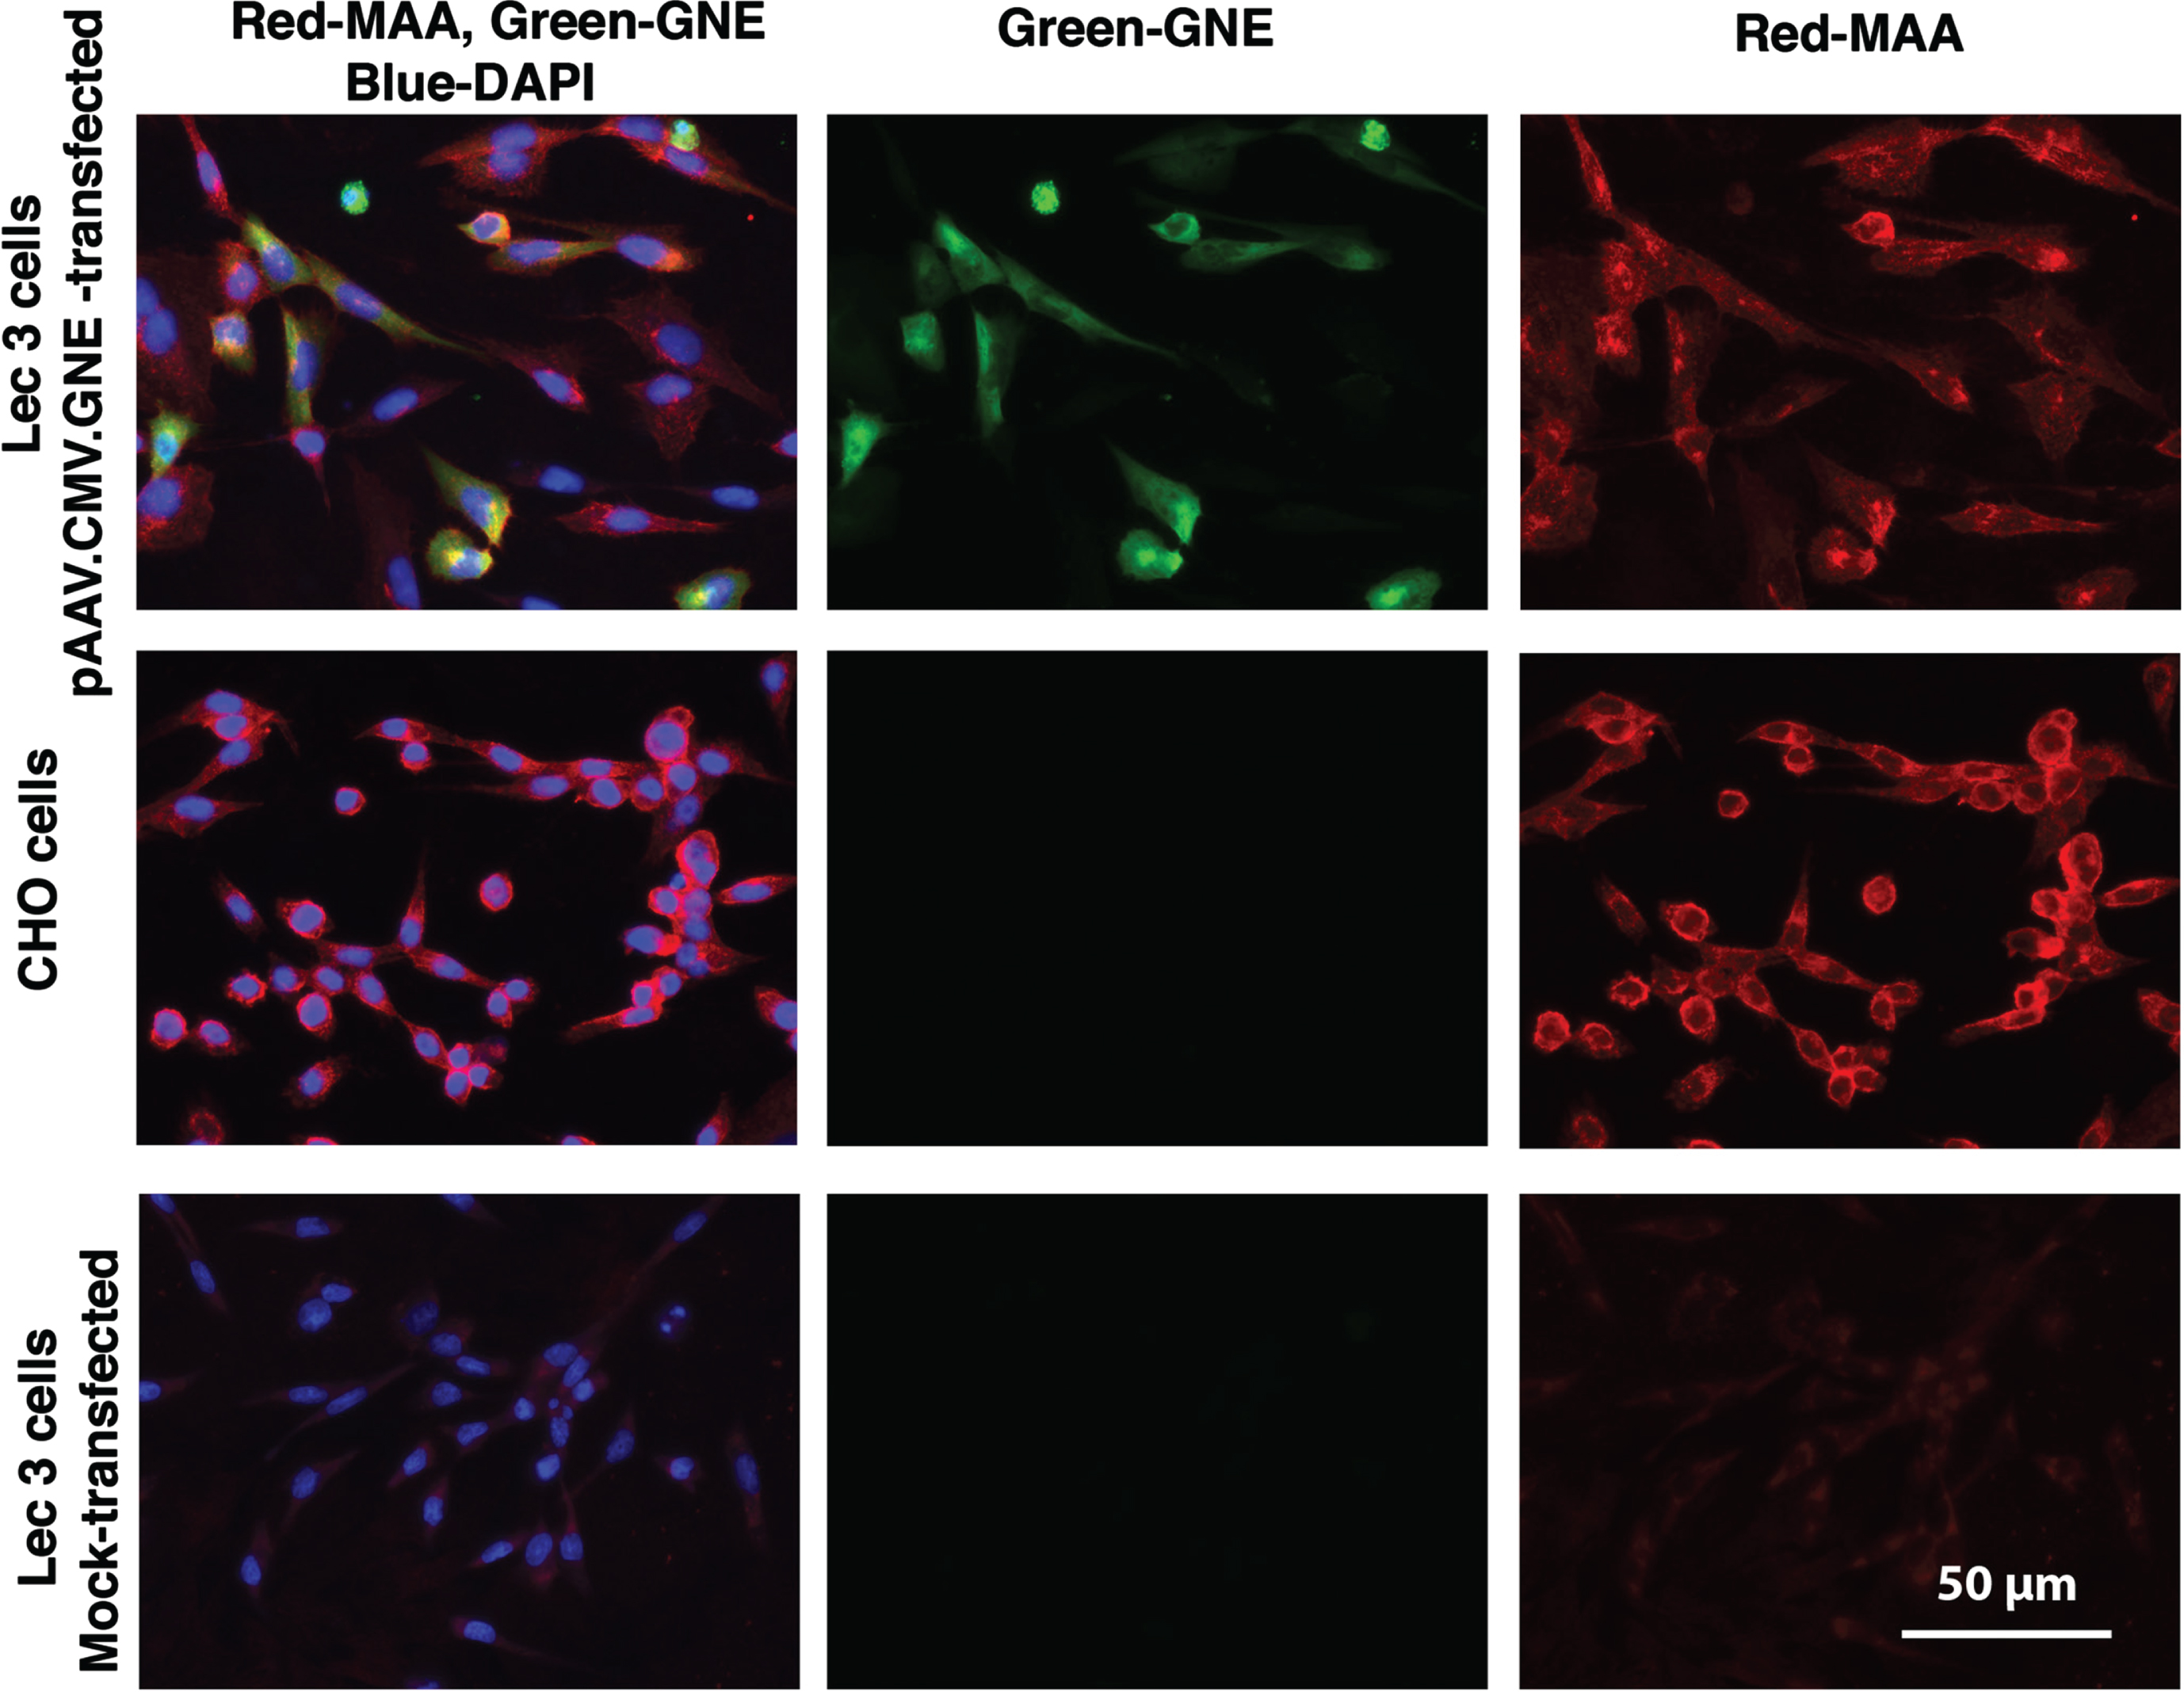 Increased MAA staining after pAAV.CMV.GNE plasmid transfection of Lec3 cells. MAA, a sialic acid binding lectin (red), anti-GNE antibody (green), and DAPI (blue) were used to stain Chinese Hamster Ovary (CHO) cells and Lec3 cells, a Gne-deficient CHO cell line. Lec3 cells were either mock-transfected (no DNA) or transfected with the pAAV.CMV.GNE plasmid to express the human GNE gene. Bar is 50μm.